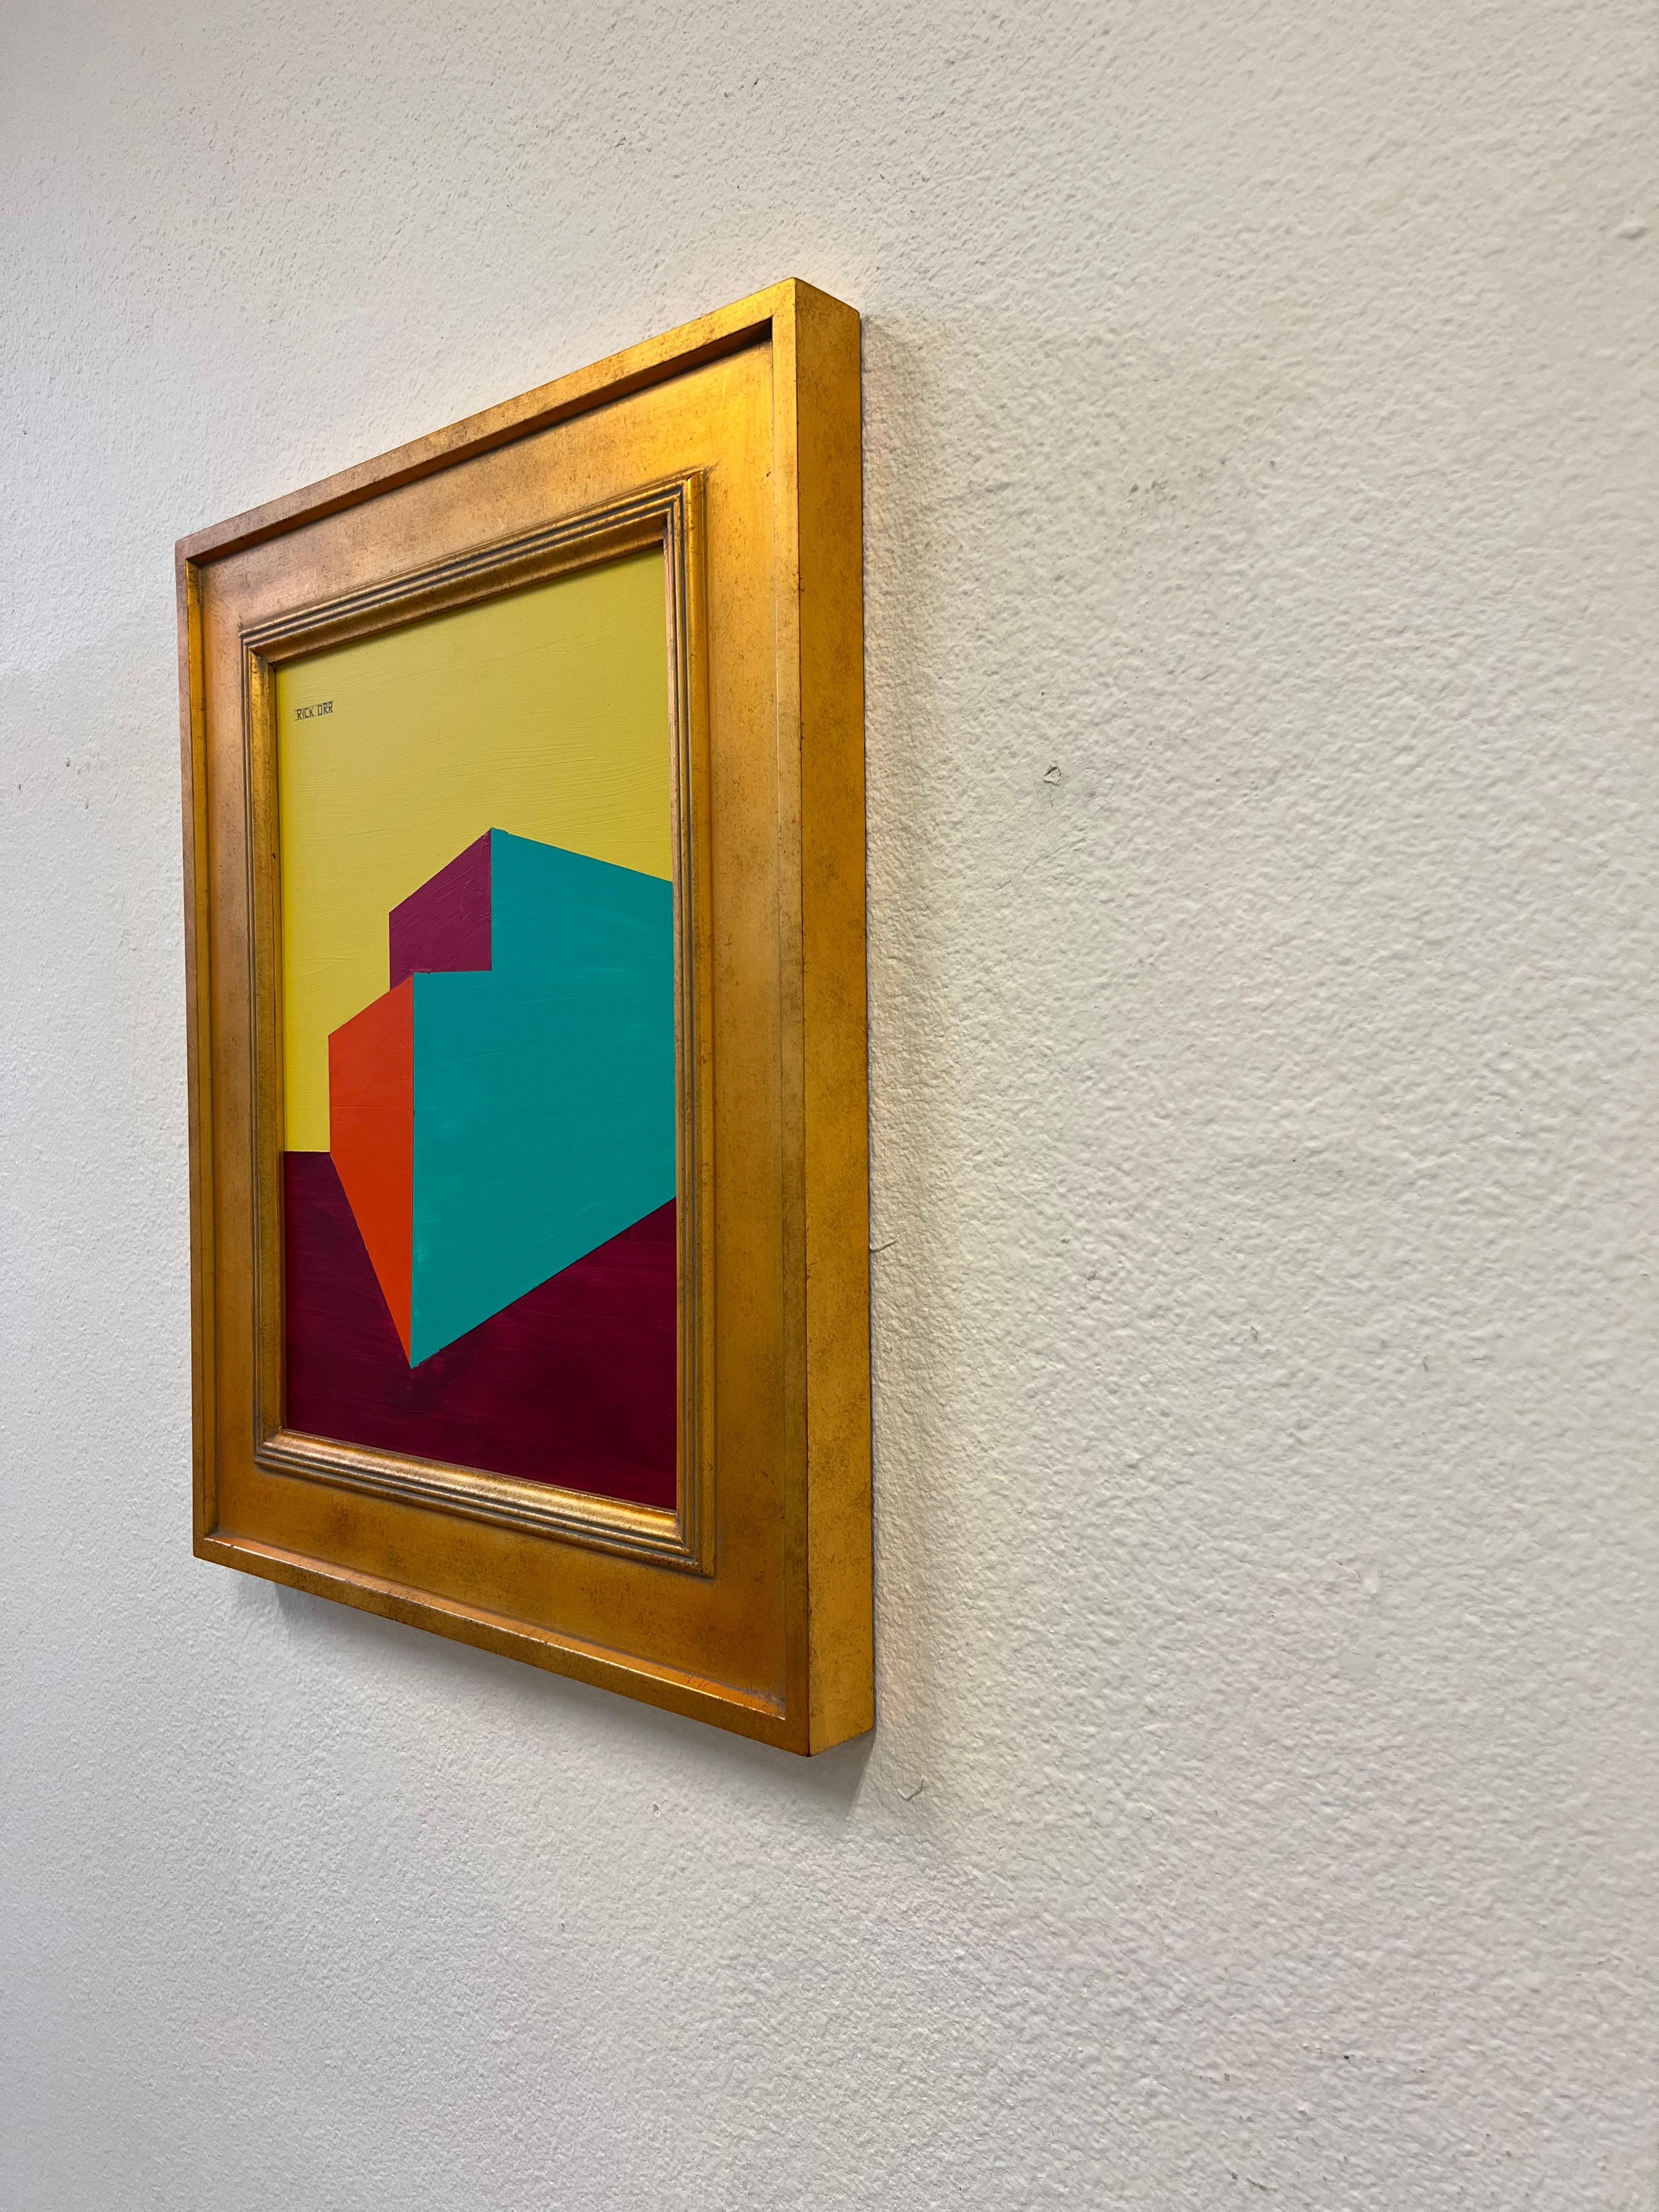 Original acrylic abstract painting on board with a gilded wood frame, by American listed artist Rick Orr. 

Measurements with frame: 17.5” Wide, 21.5” High, 1.5” Deep.